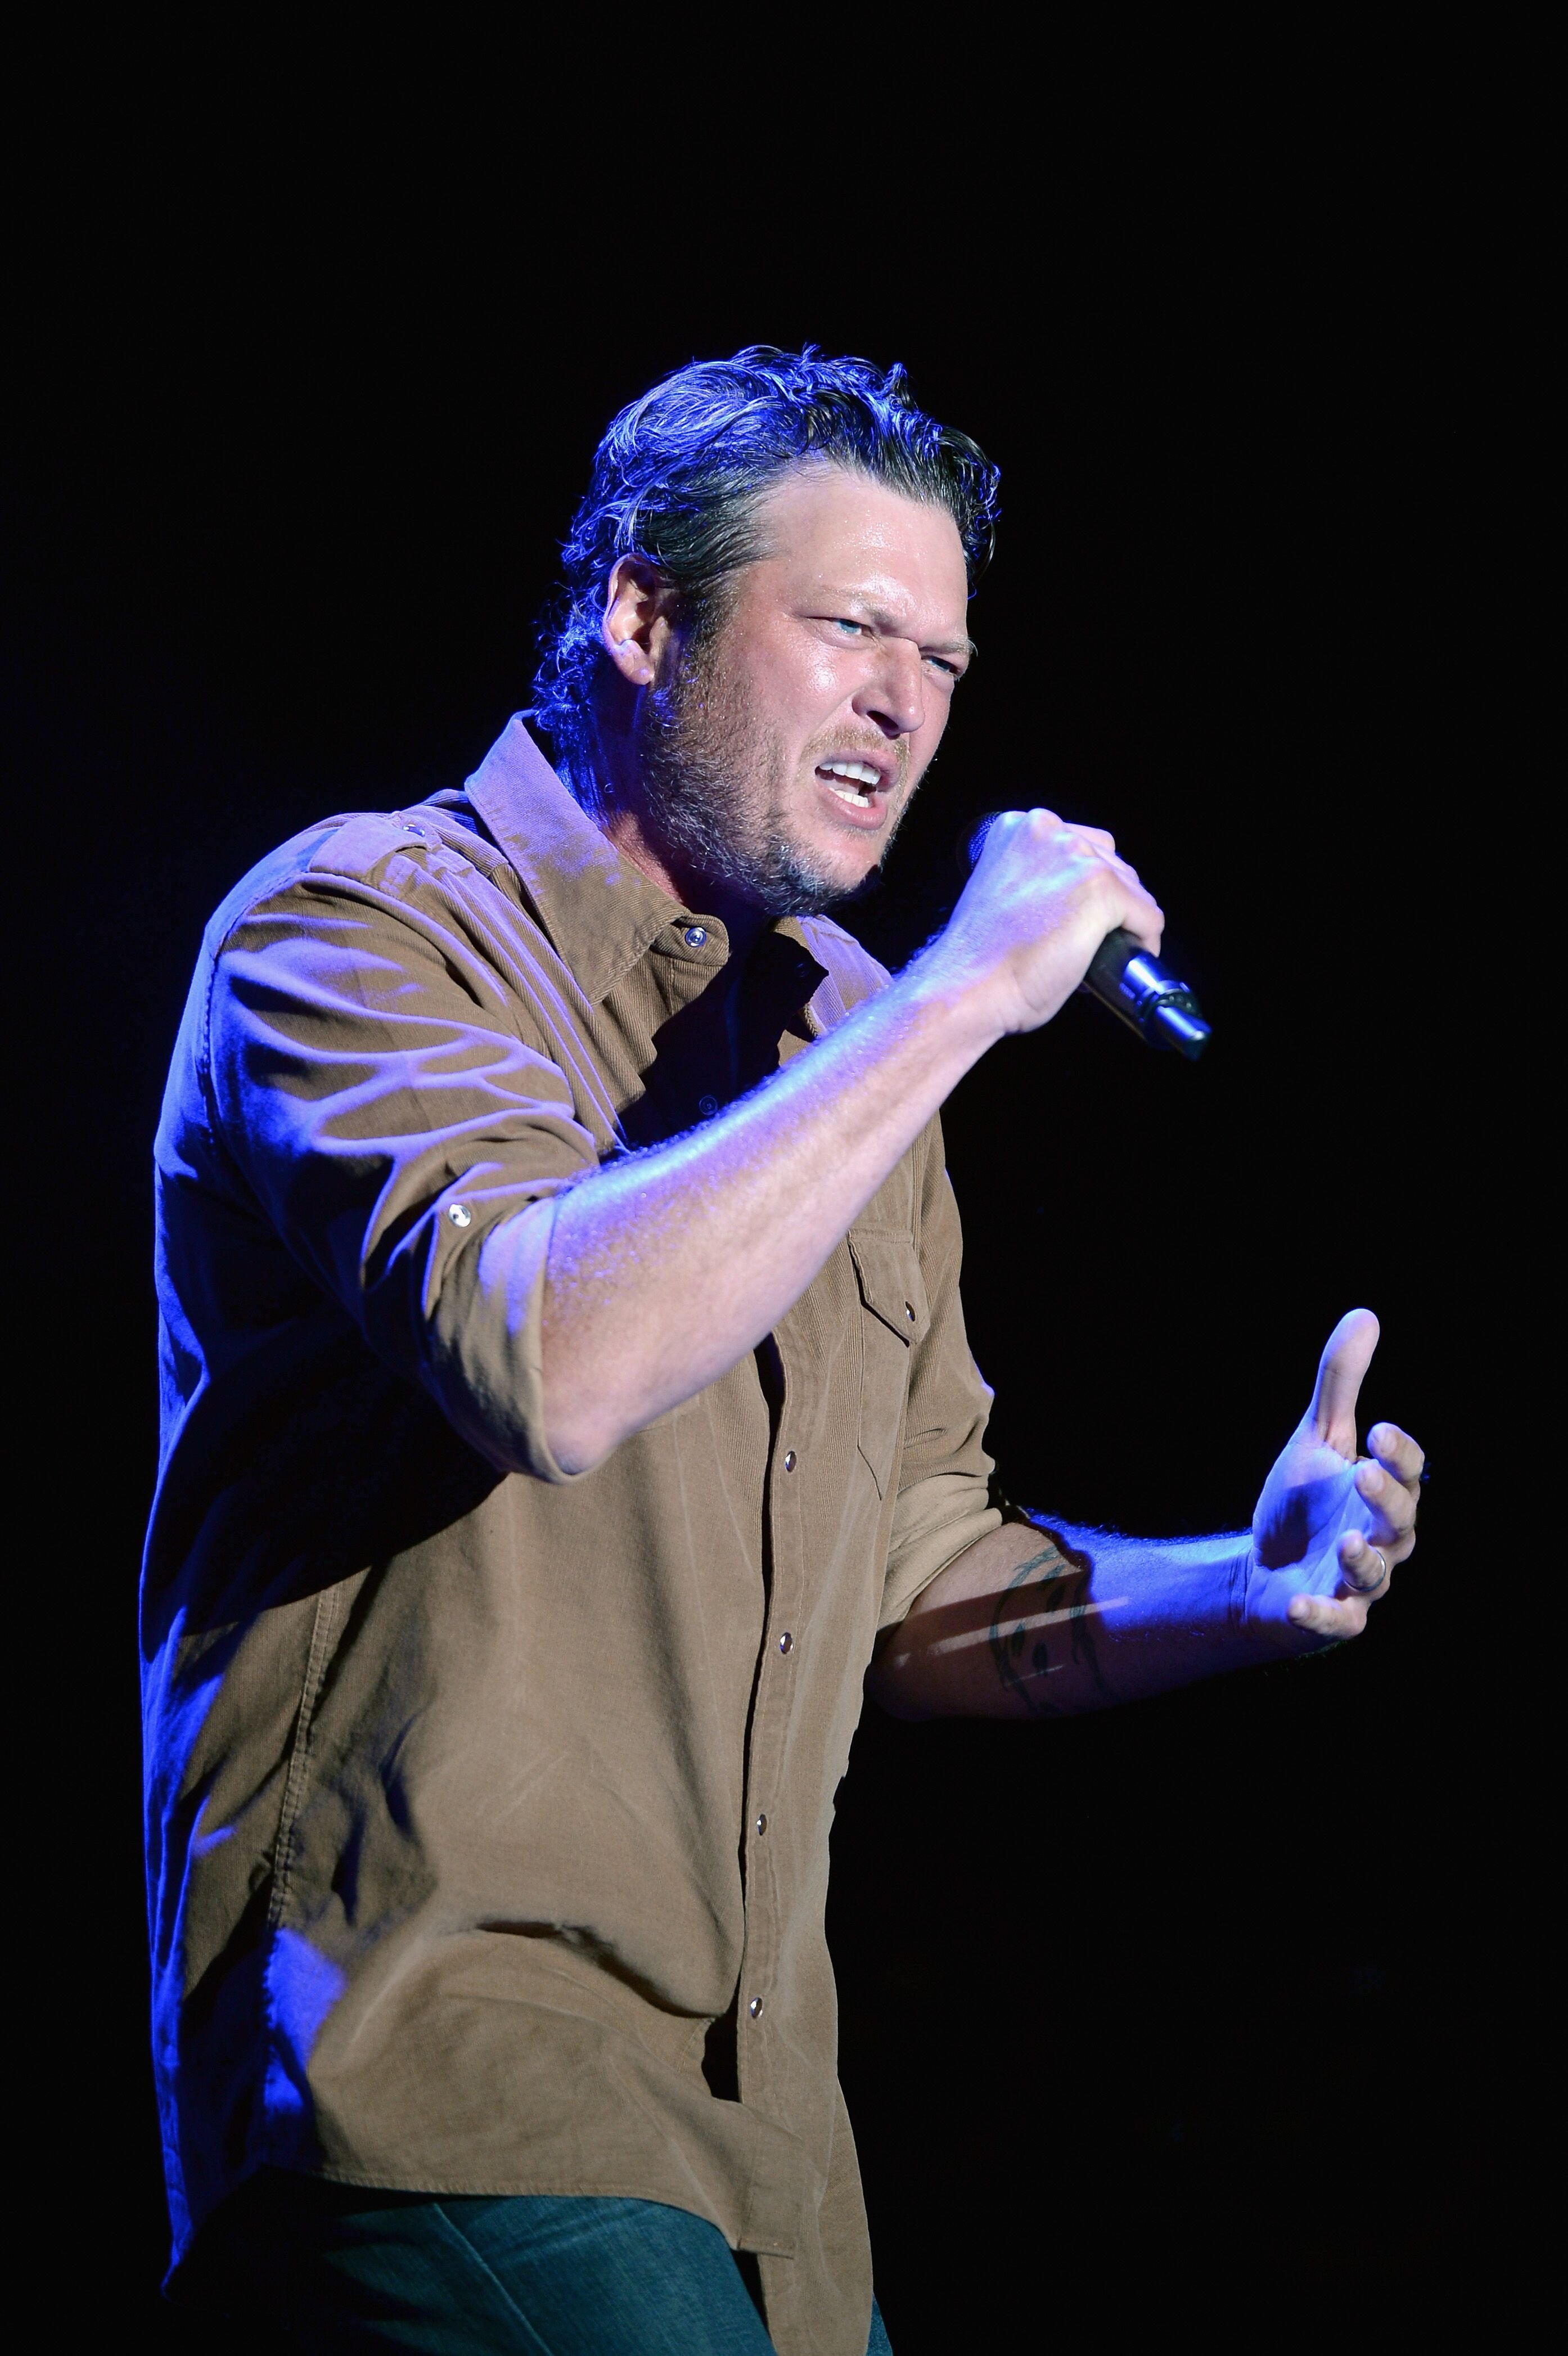 Singer Blake Shelton performs onstage during day 1 of the Big Barrel Country Music Festival on June 26, 2015 | Photo: Getty Images